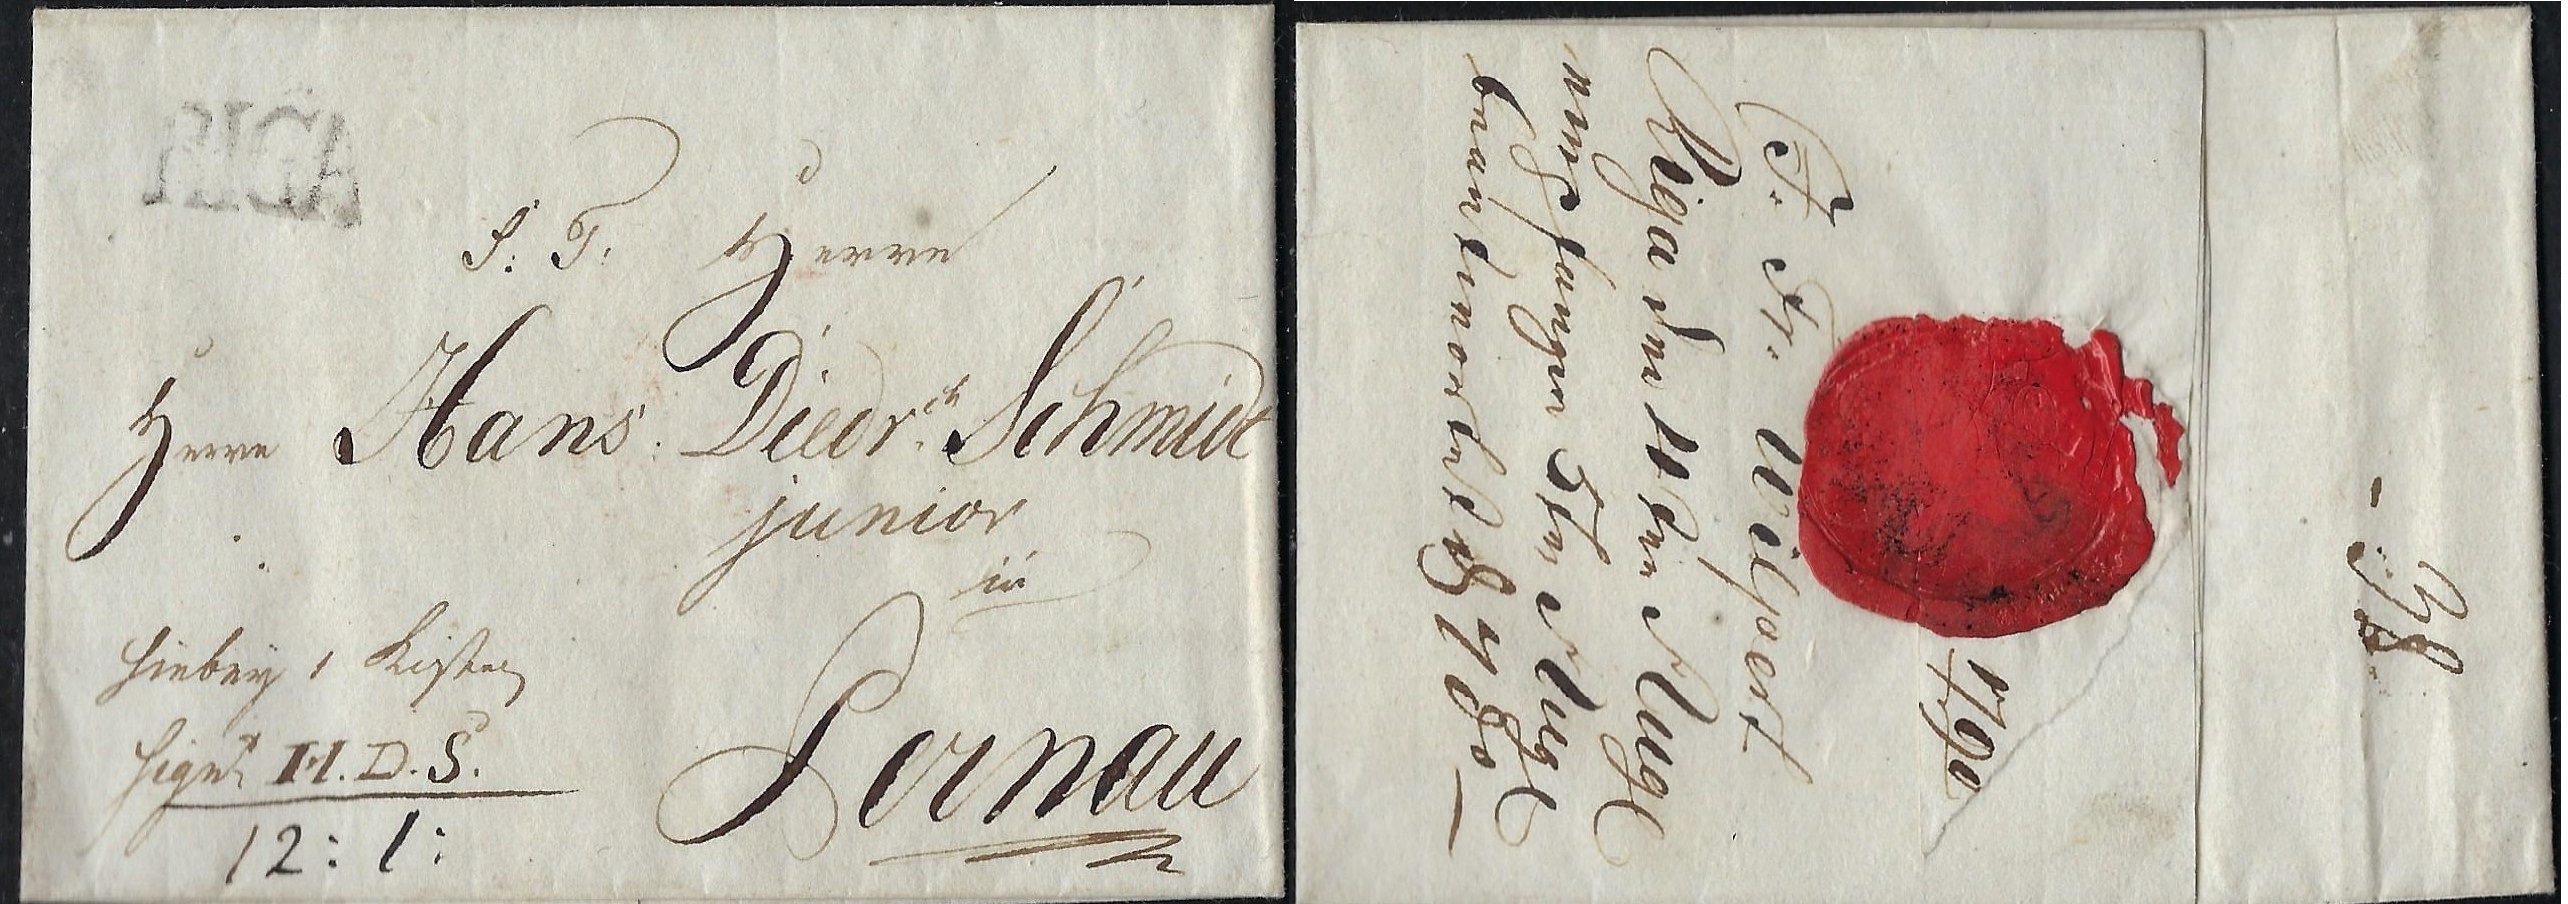 Russia Postal History - Stampless Covers Scott 3001790 